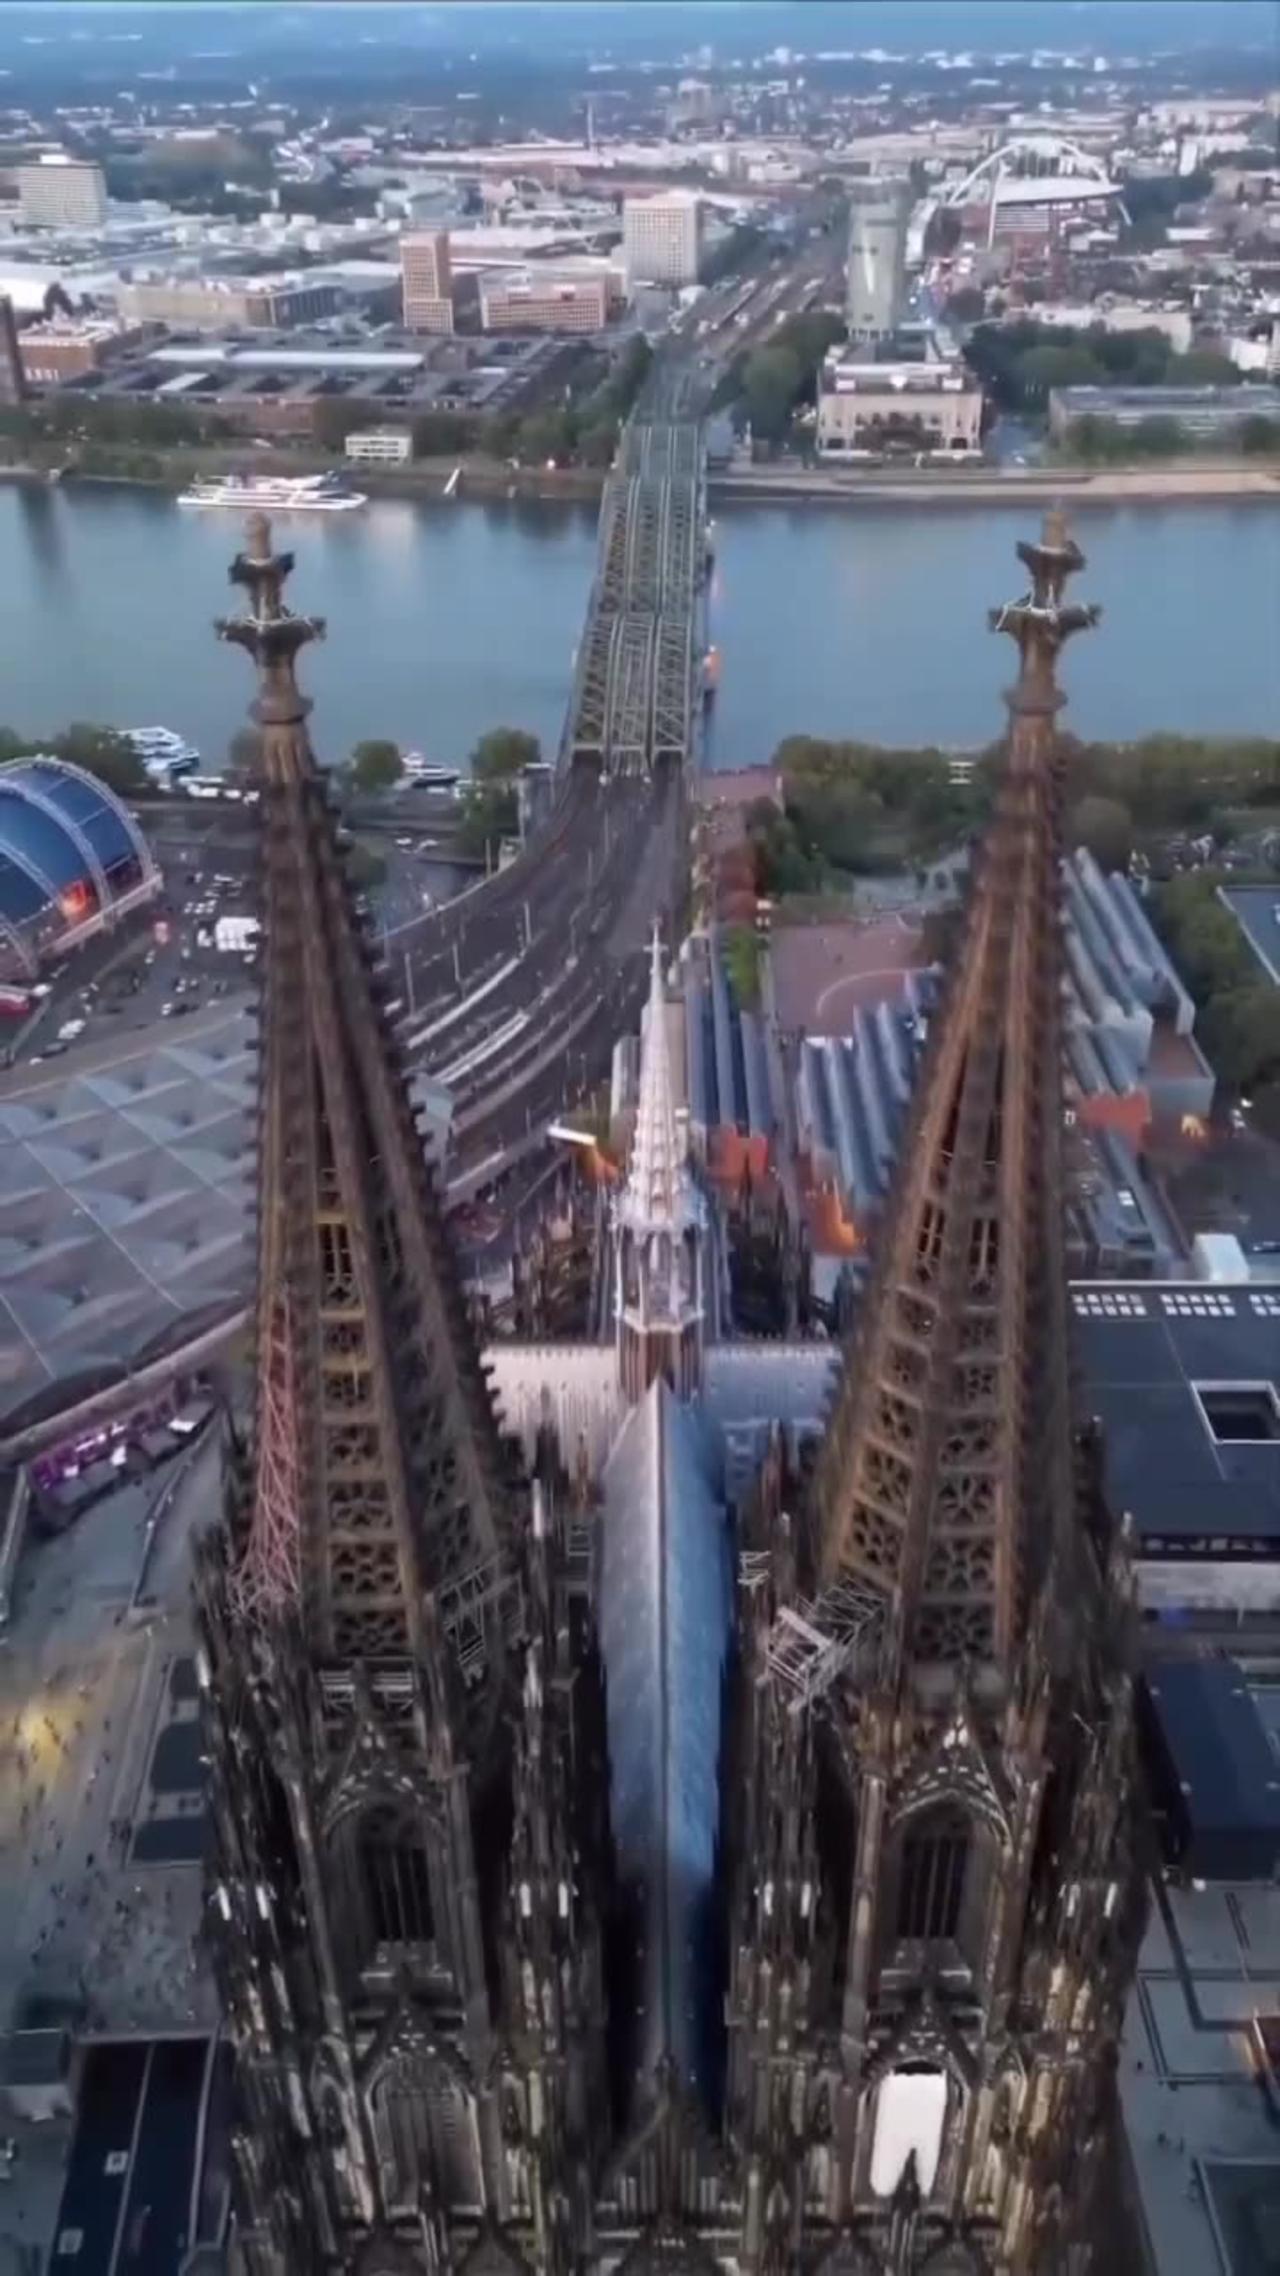 THE MOST BREATHTAKING CHURCH IN GERMANY~COLOGNE CATHEDRAL COLOGNE 1880